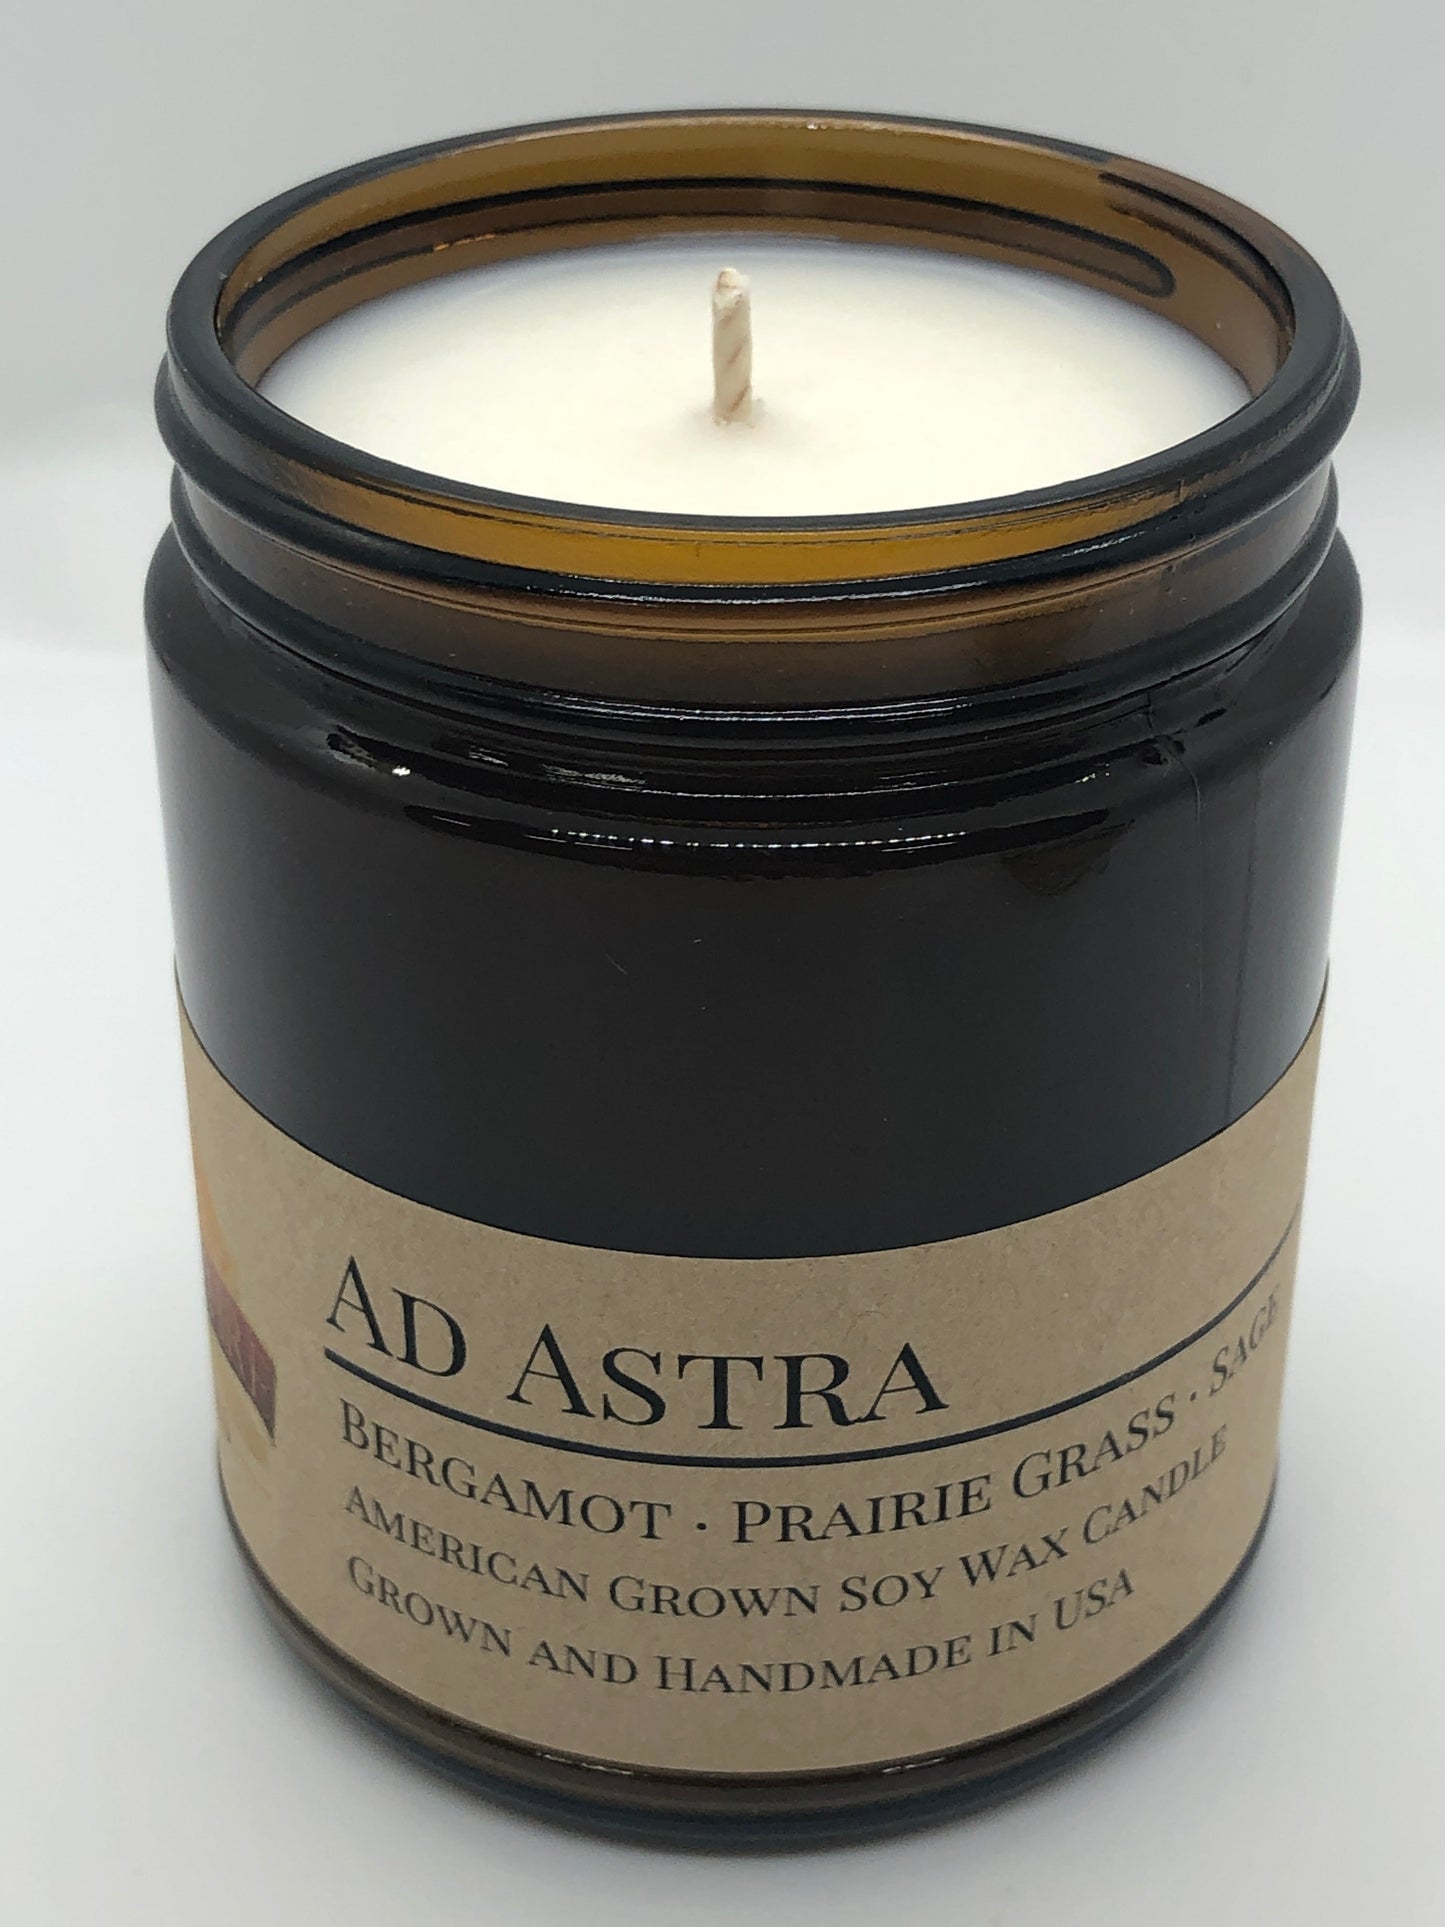 Ad Astra Soy Candle | 9 oz Amber Apothecary Jar